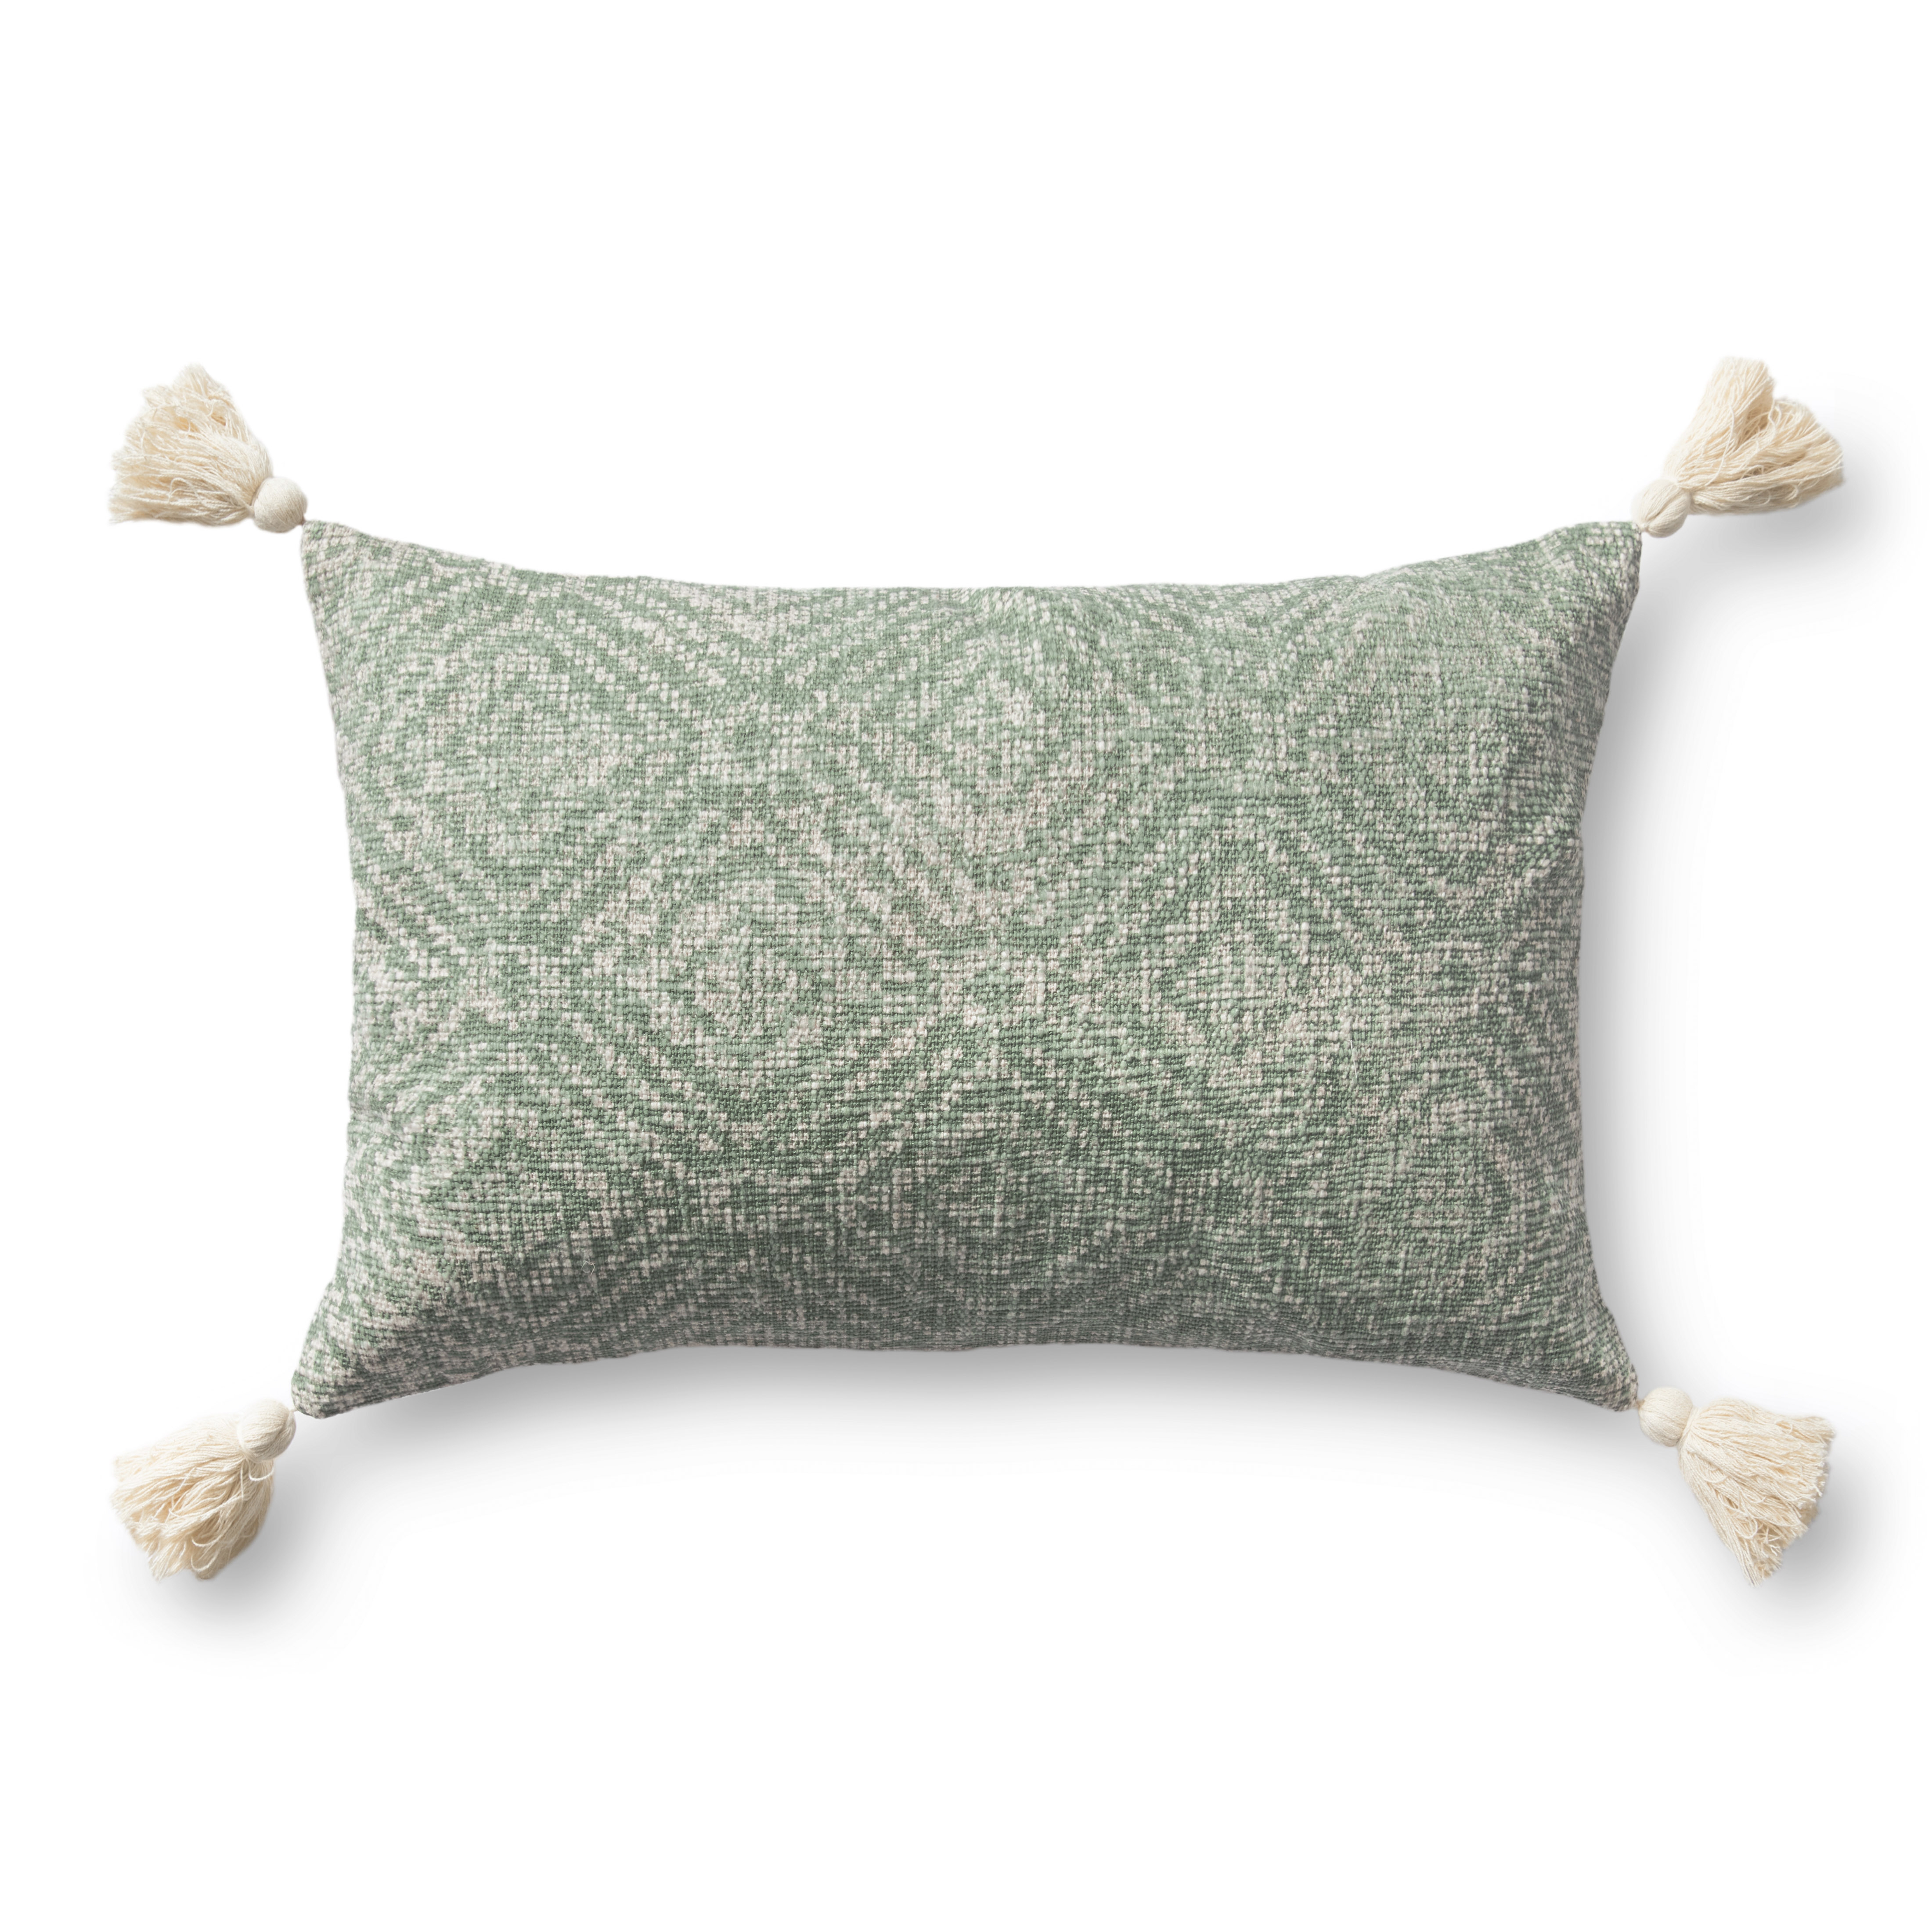 Loloi Pillows P0621 Green 13" x 21" Cover Only - Loloi Rugs